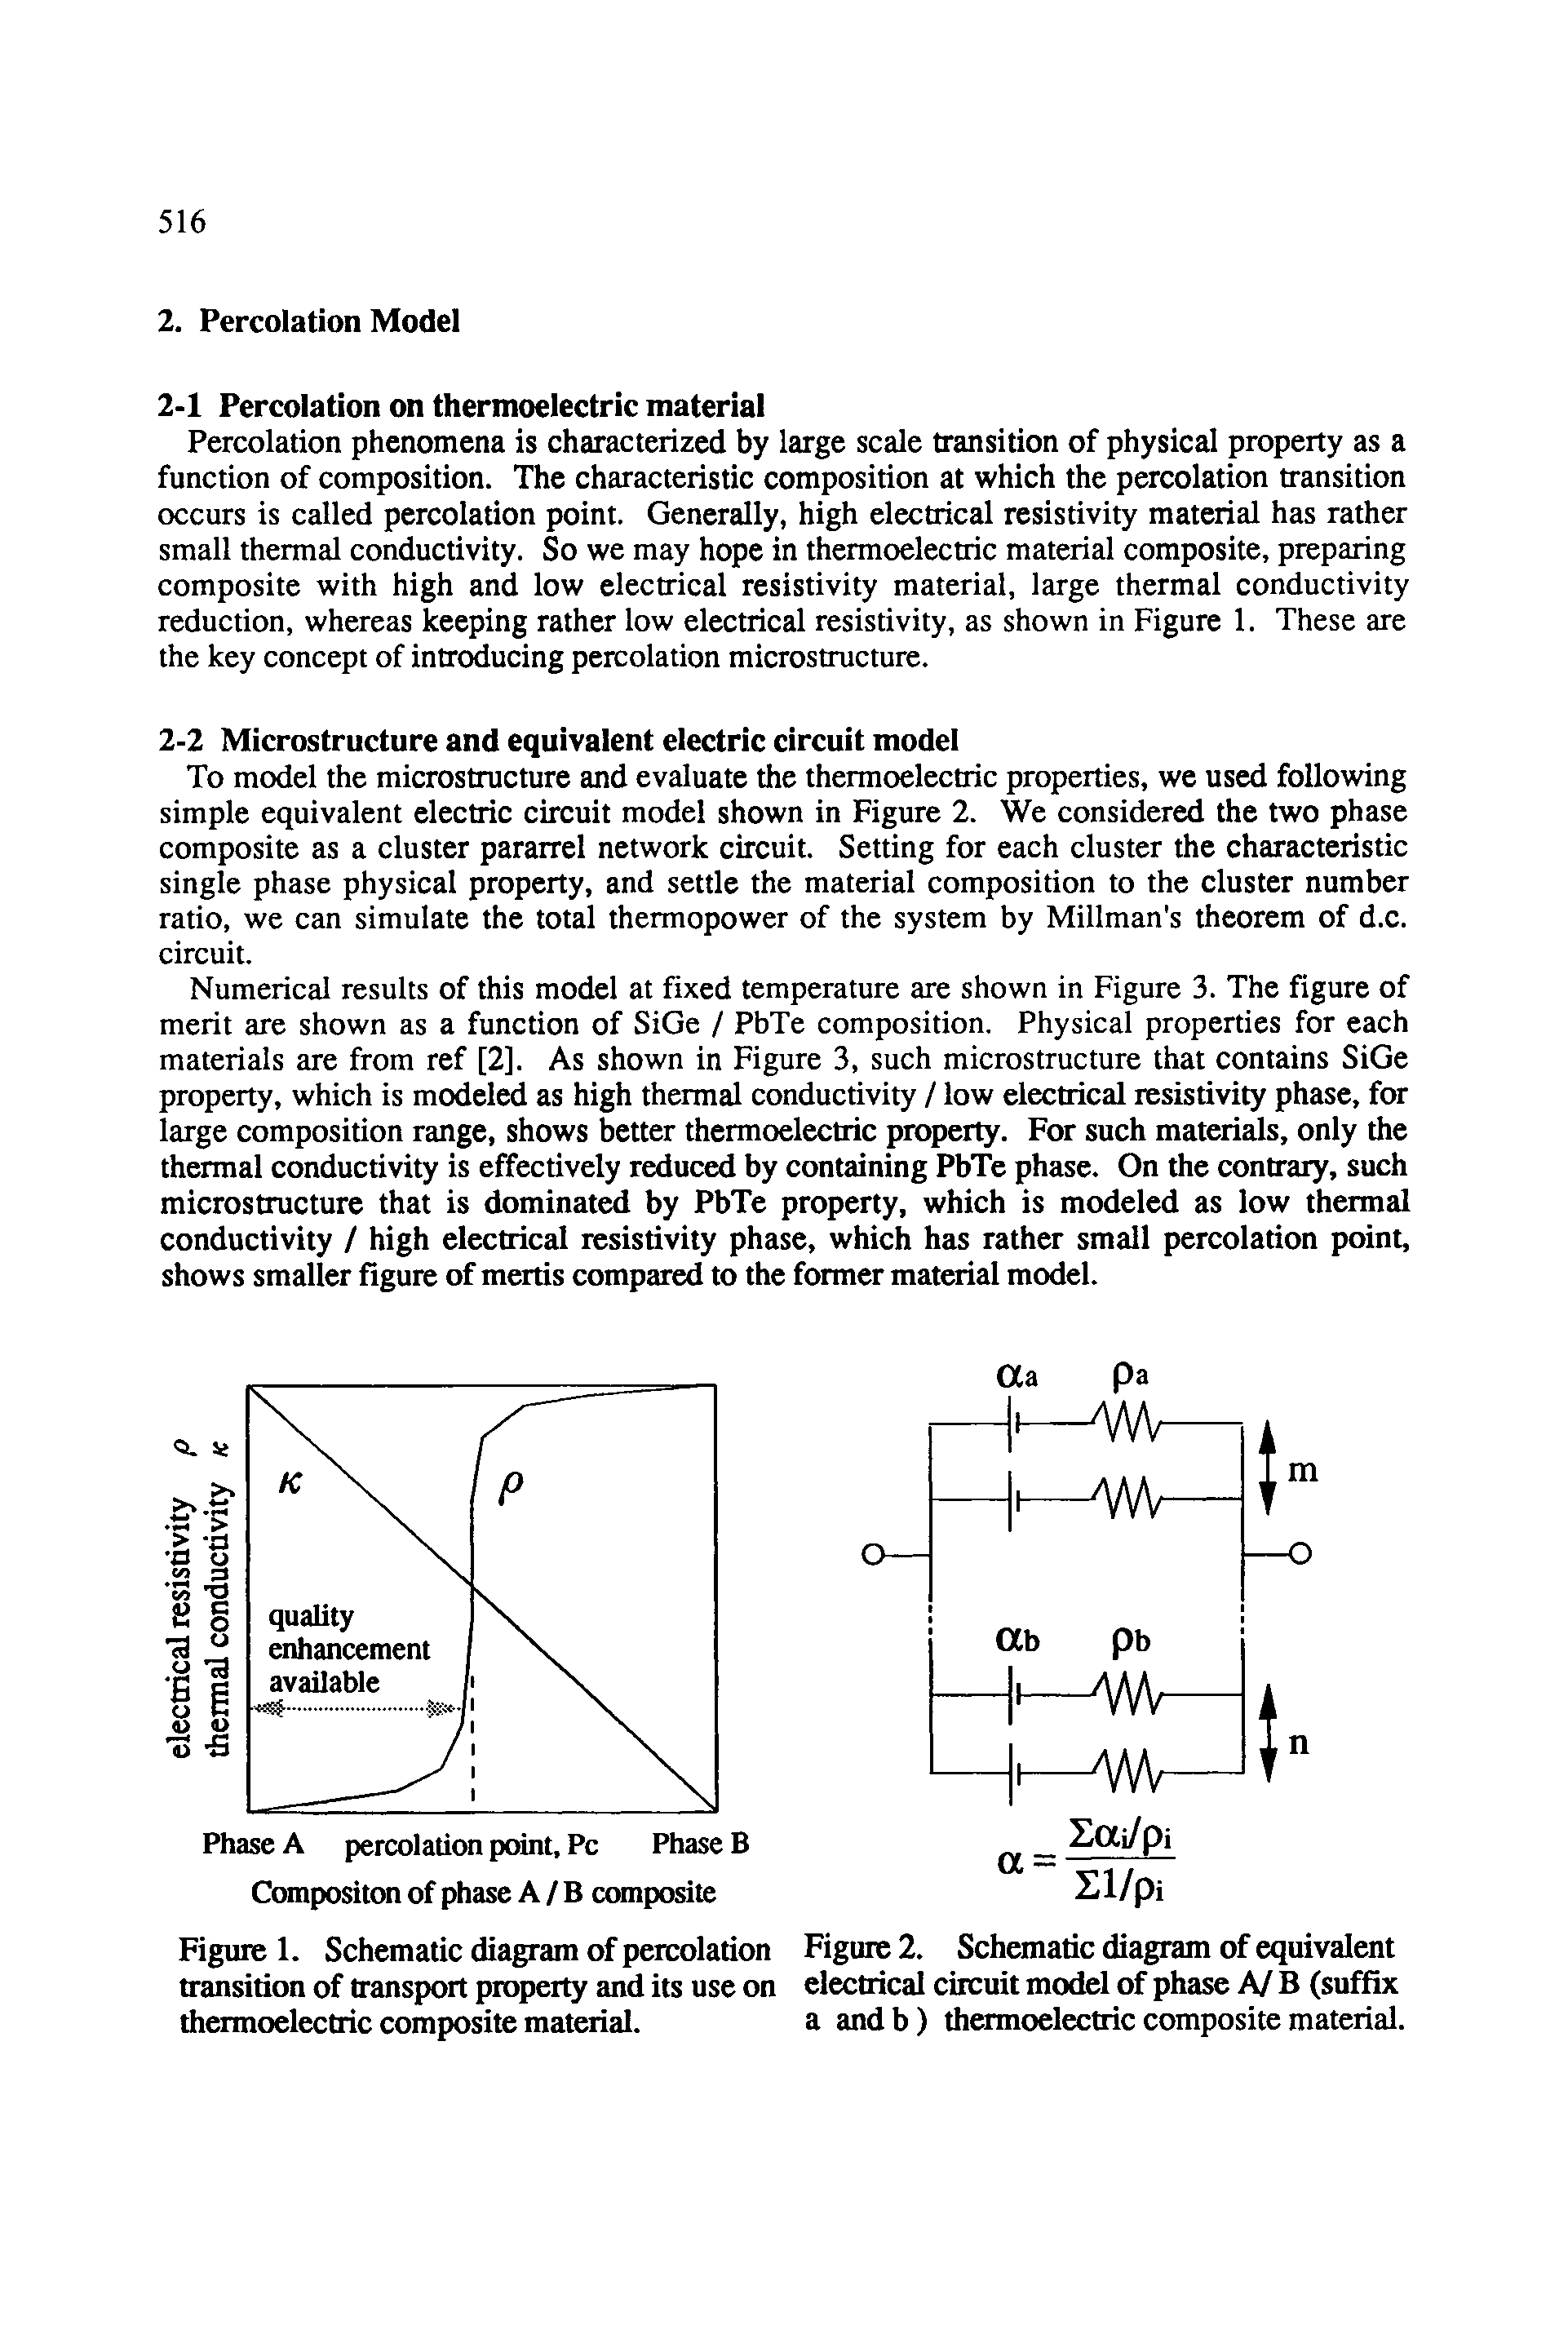 Figure 1. Schematic diagram of percolation transition of transport property and its use on thermoelectric composite material.